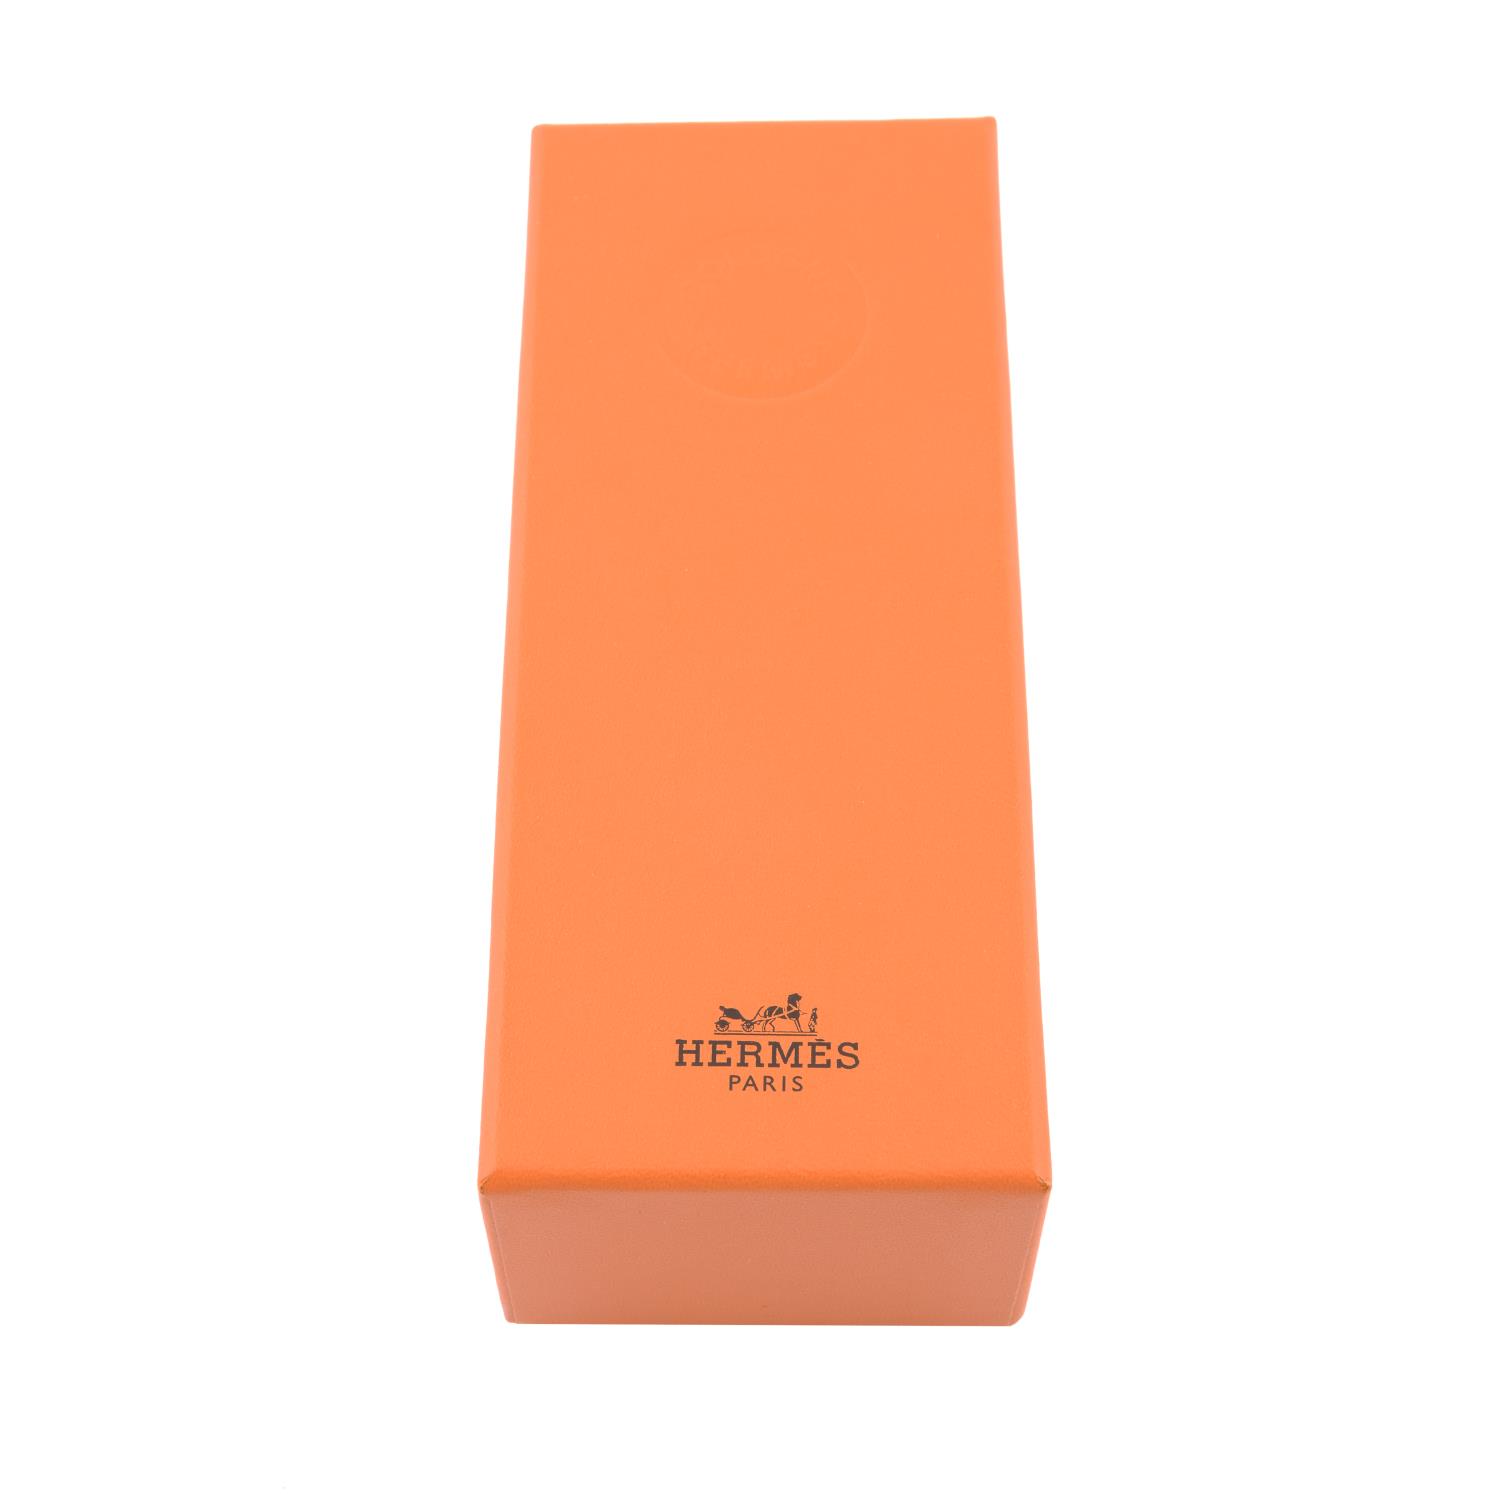 HERMÈS - a Swift Atomizer Refillable Bottle and Case. - Image 3 of 3